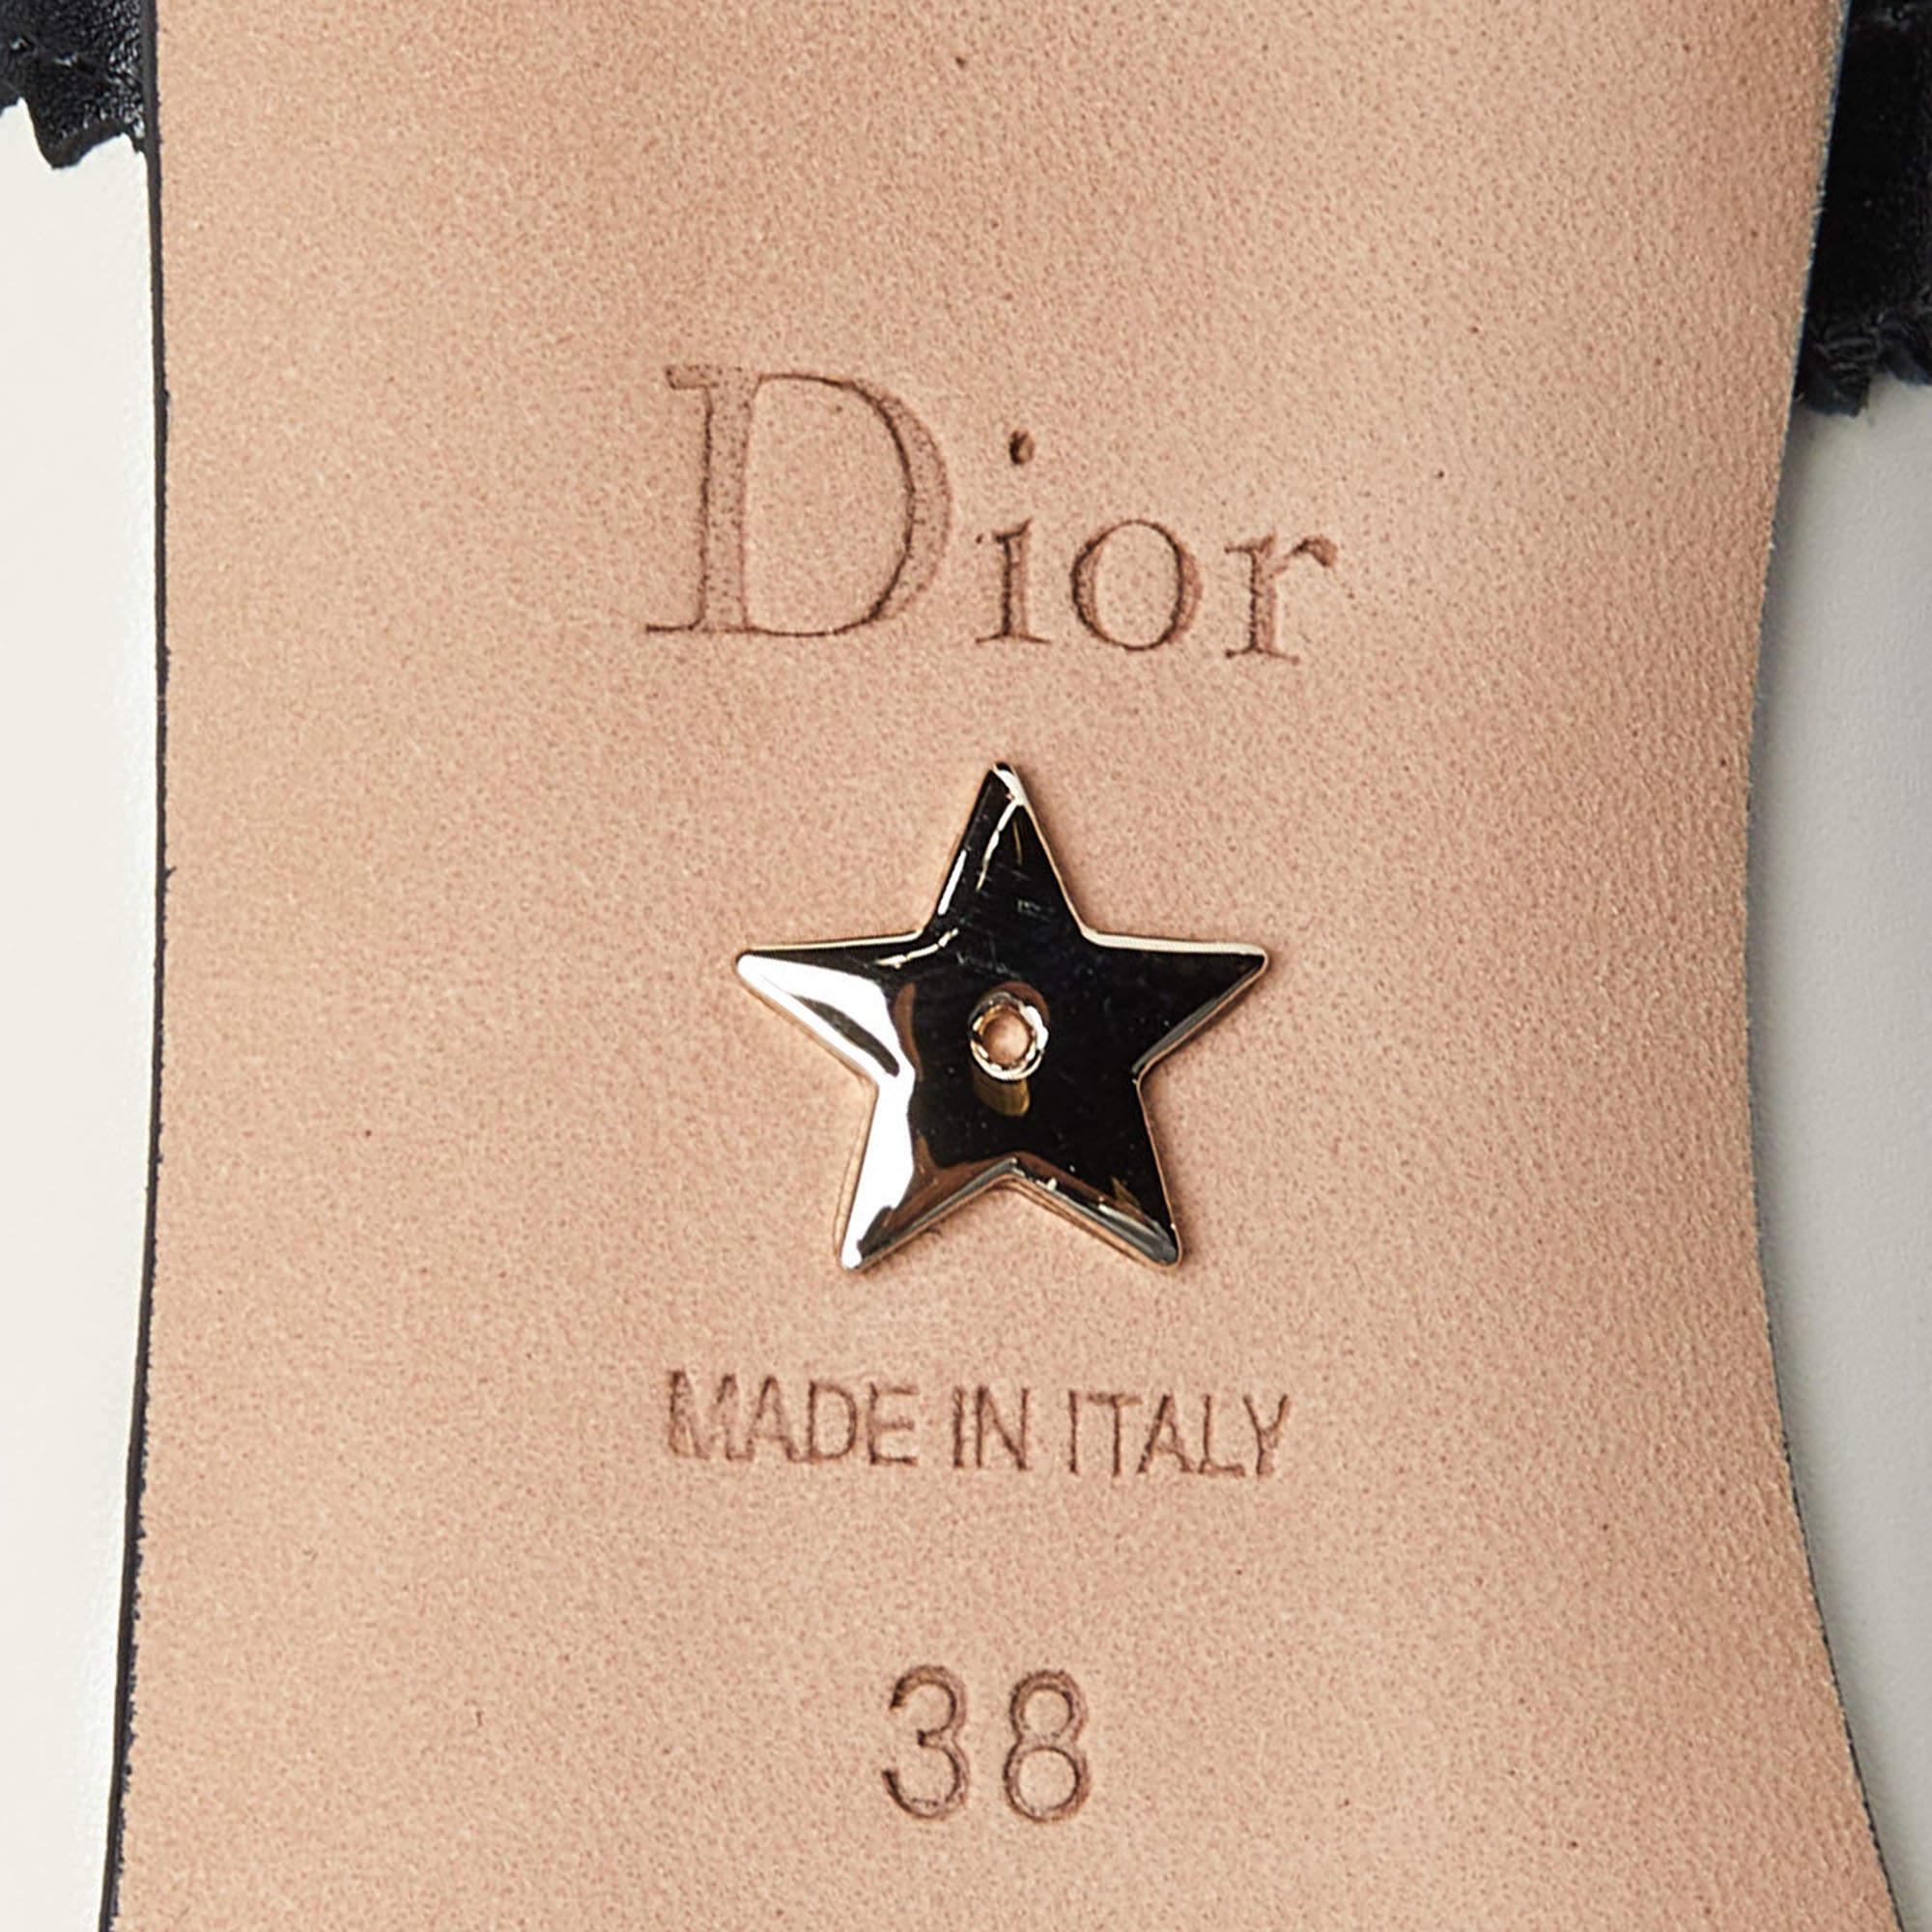 Dior Black/Cream Leather Mary Jane Pumps Size 38 4